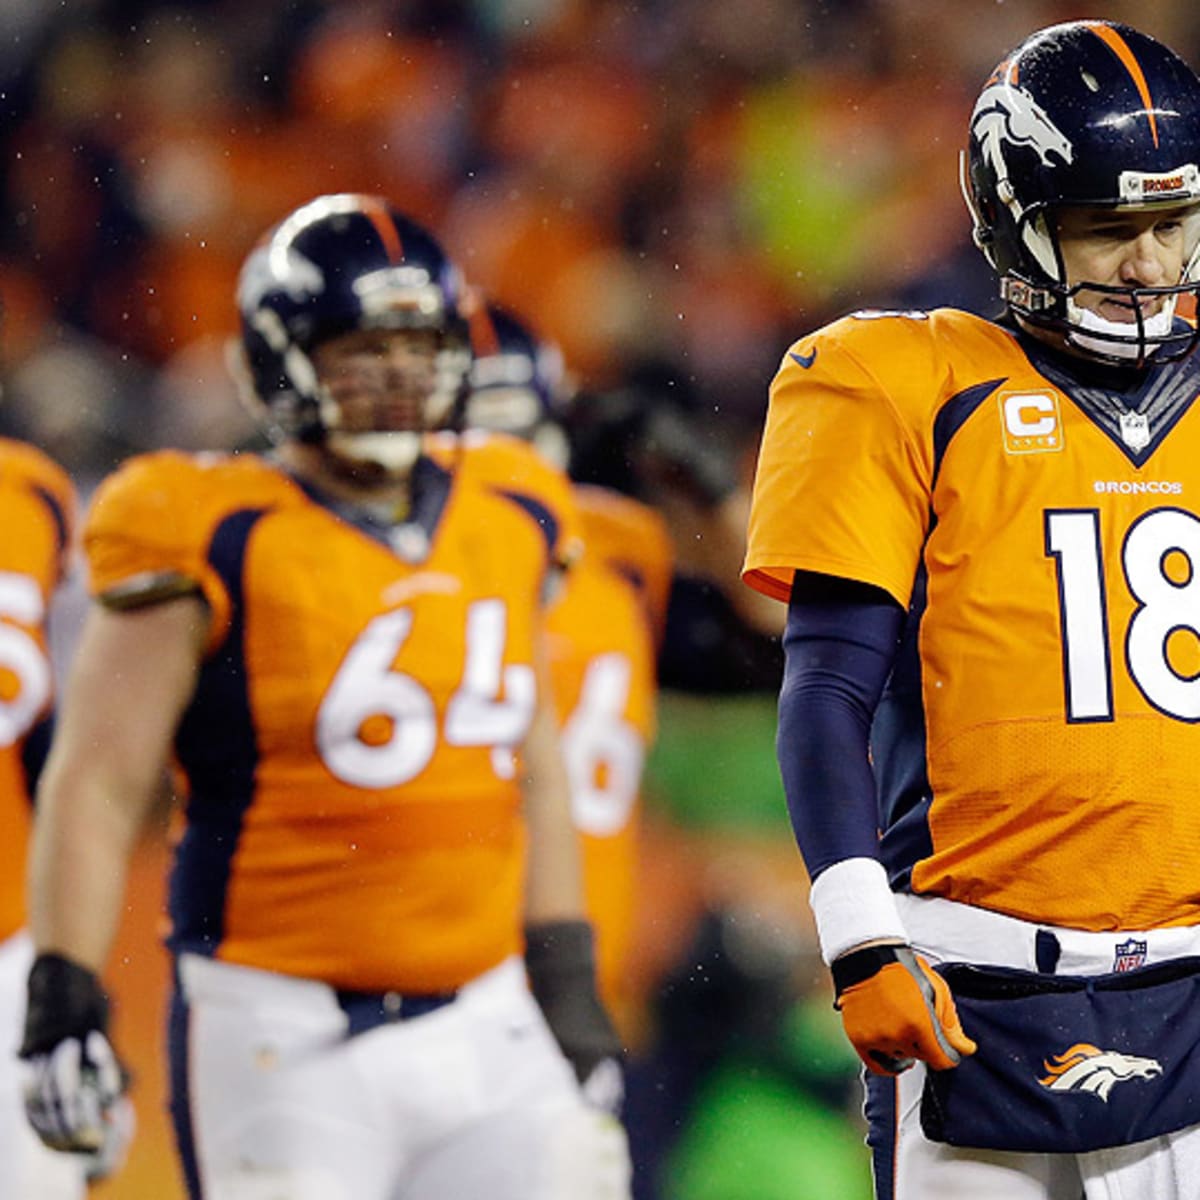 Peyton Manning will retire a Bronco, forego one-day Colts contract